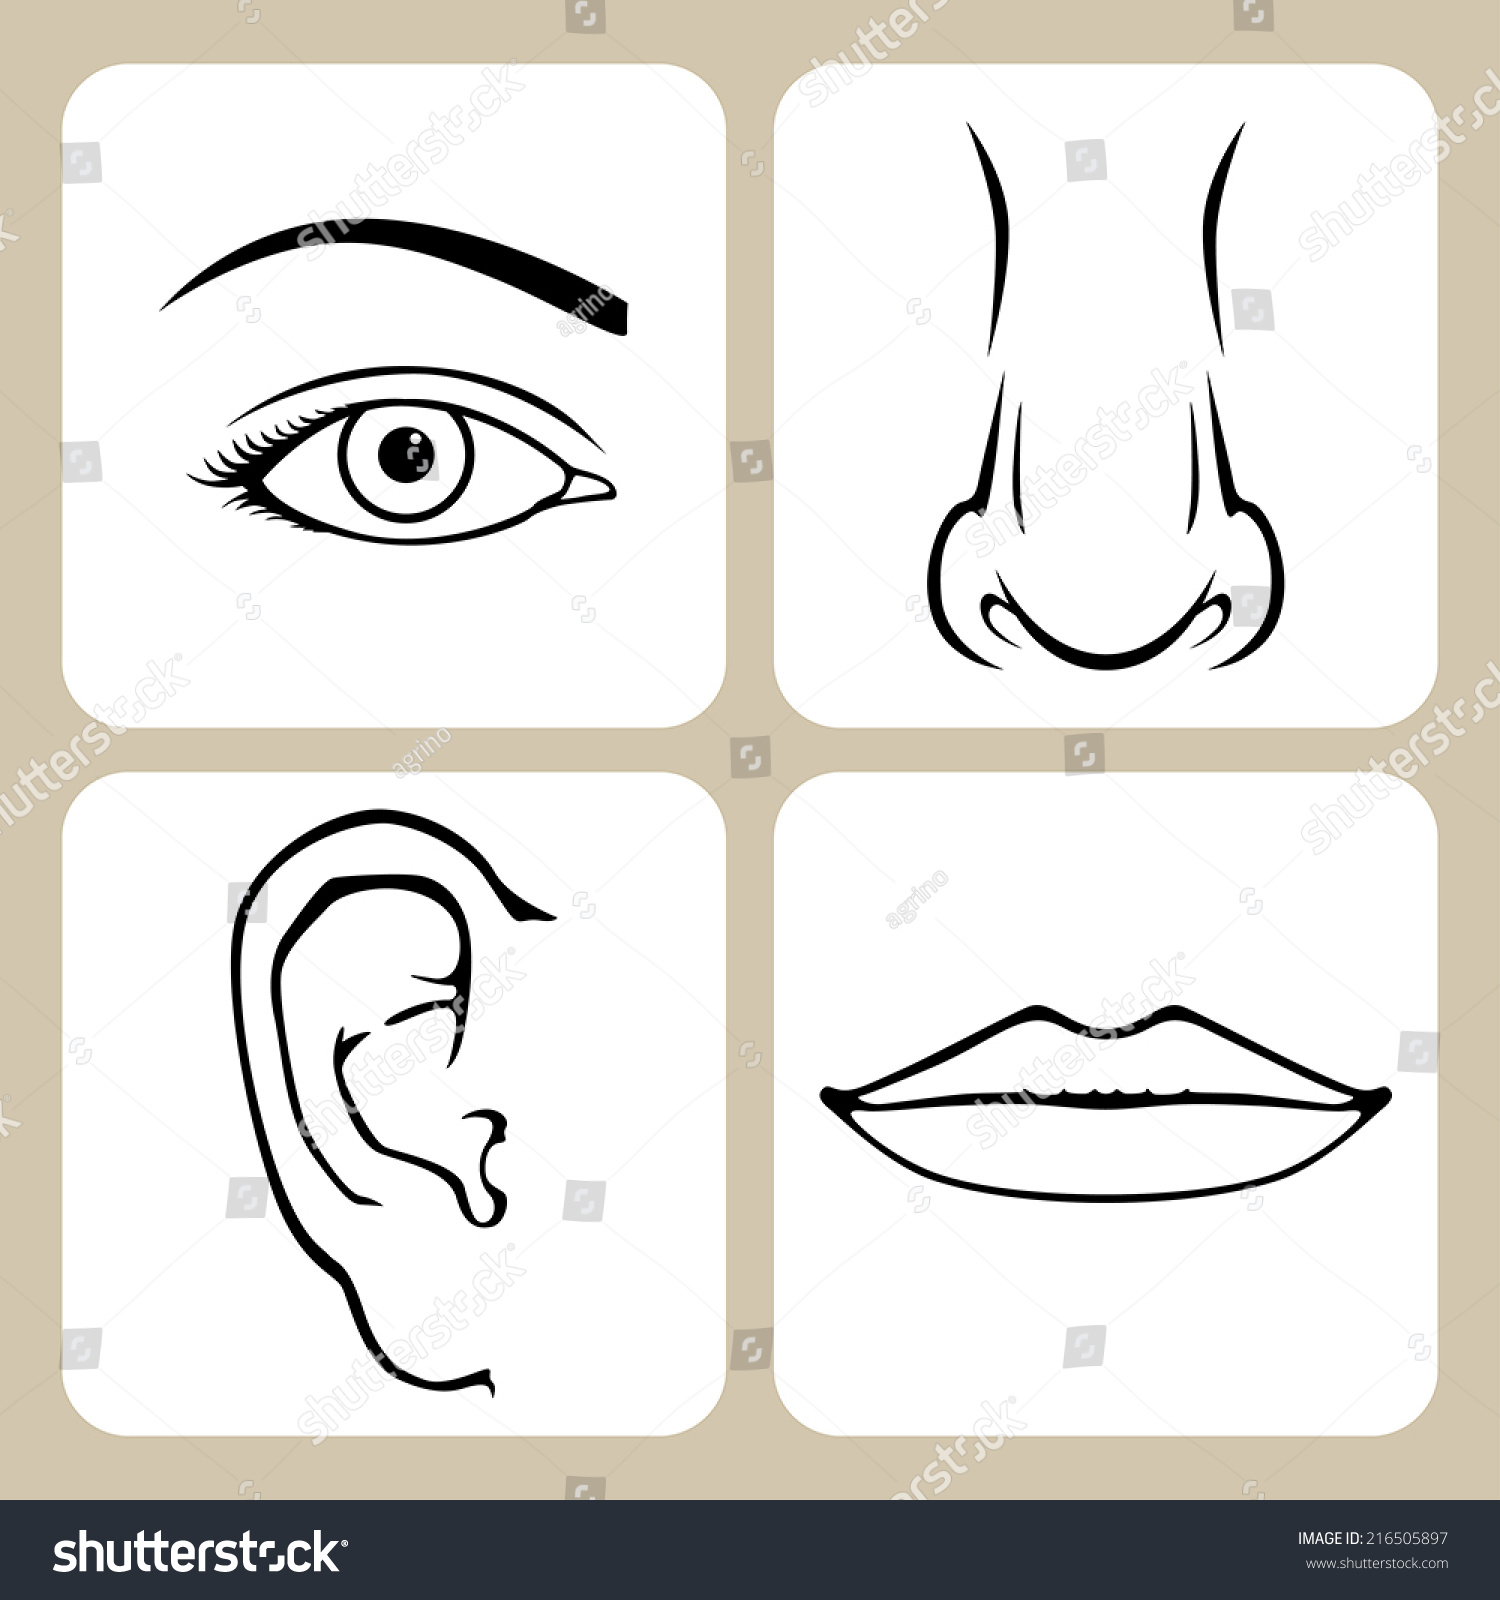 Contour Image Of Nose, Eye, Mouth, Ear Stock Vector Illustration ...